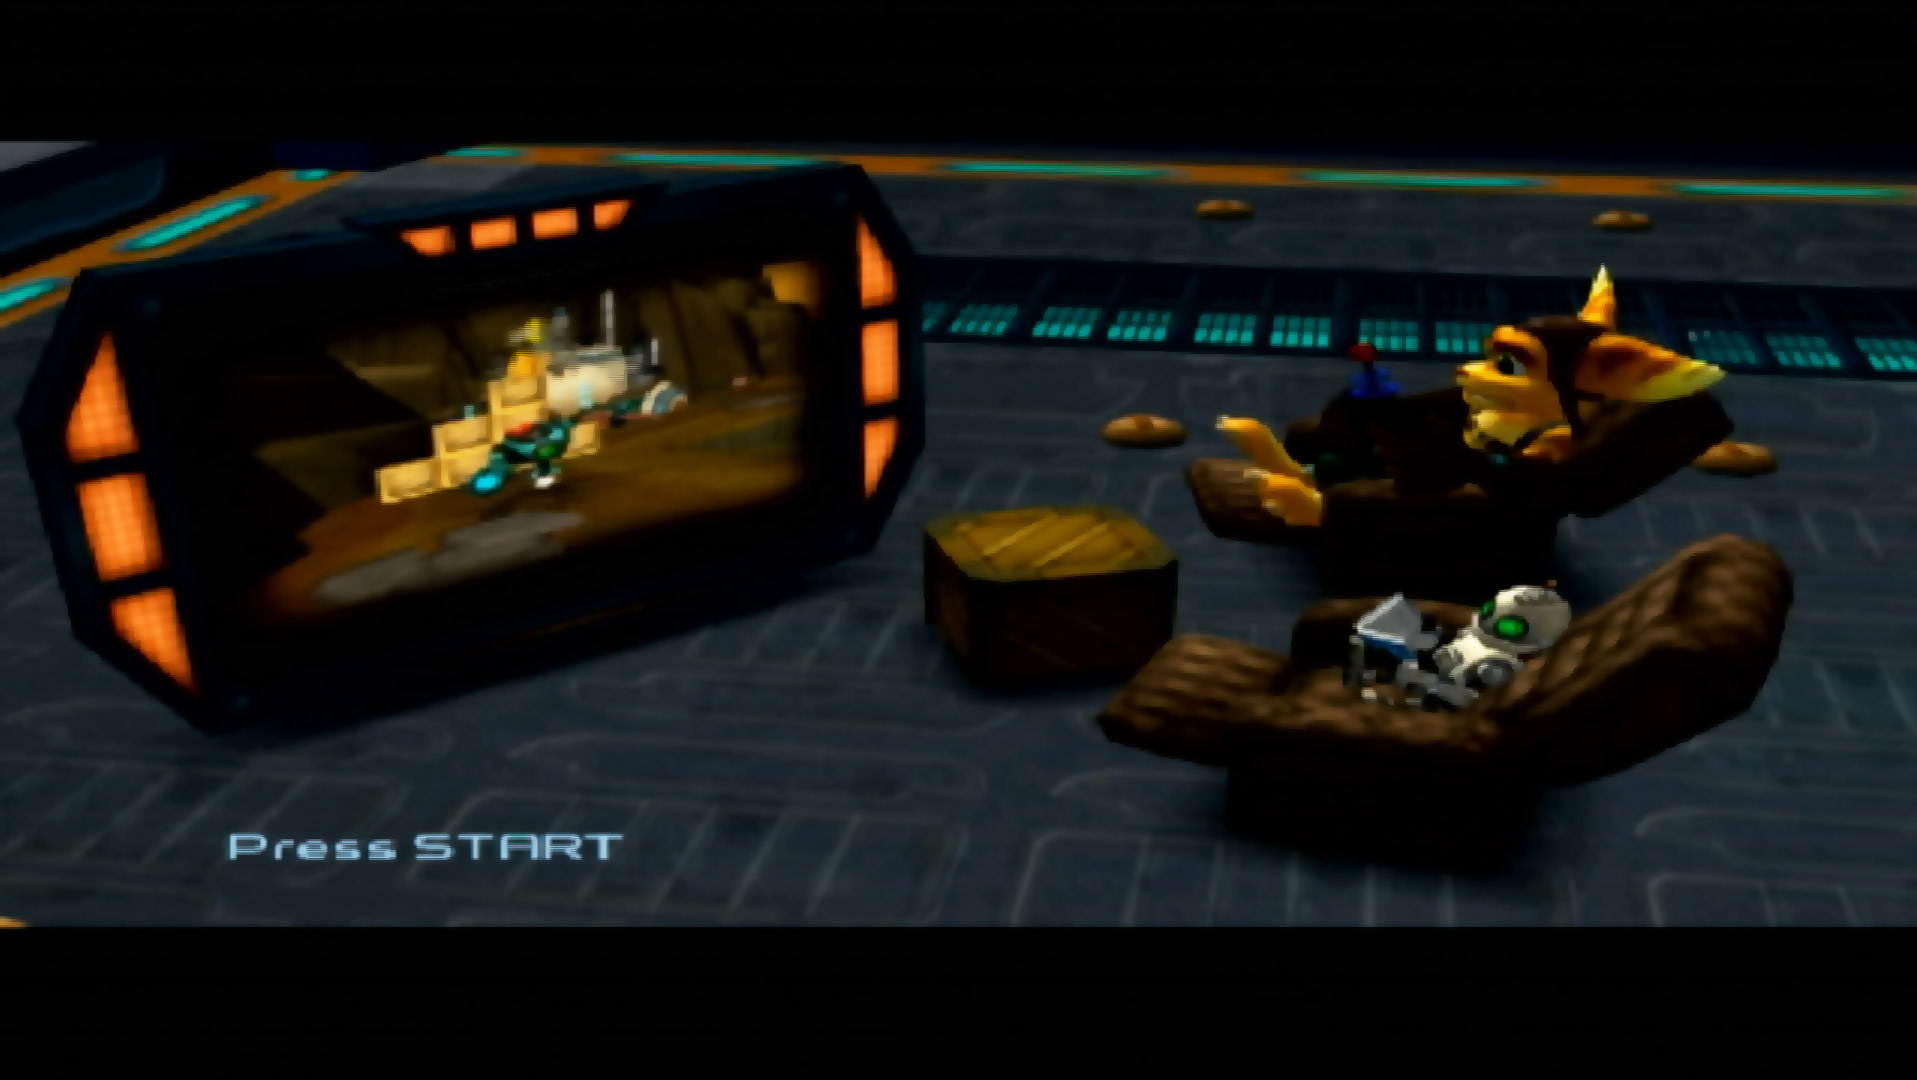 Ratchet & Clank Going Commando PS2 title screen